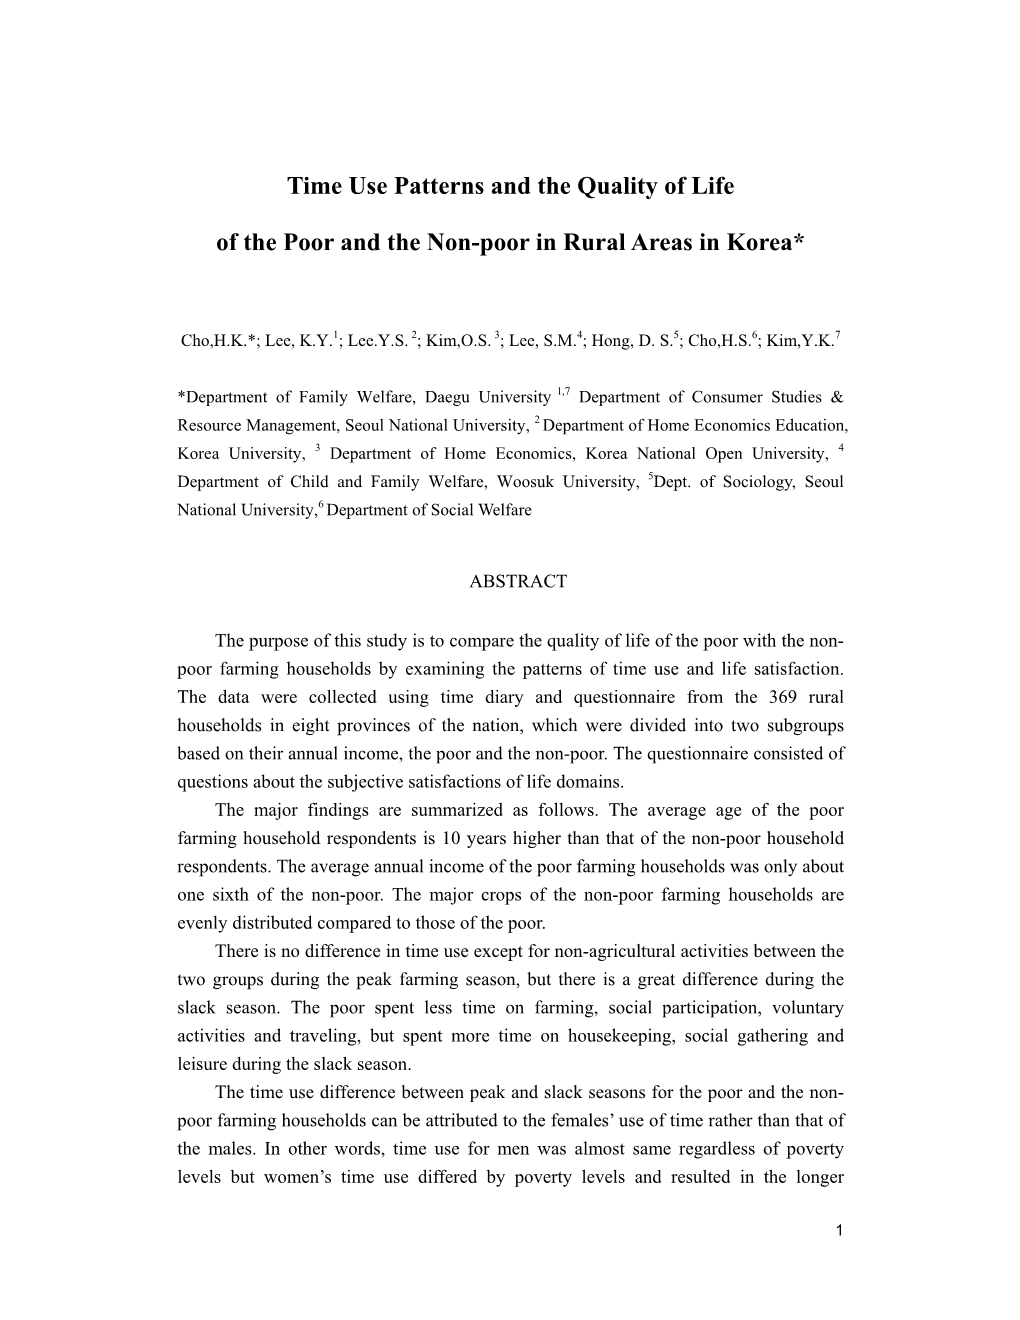 Time Use Patterns and the Quality of Life of the Poor and the Non-Poor in Rural Areas in Korea*